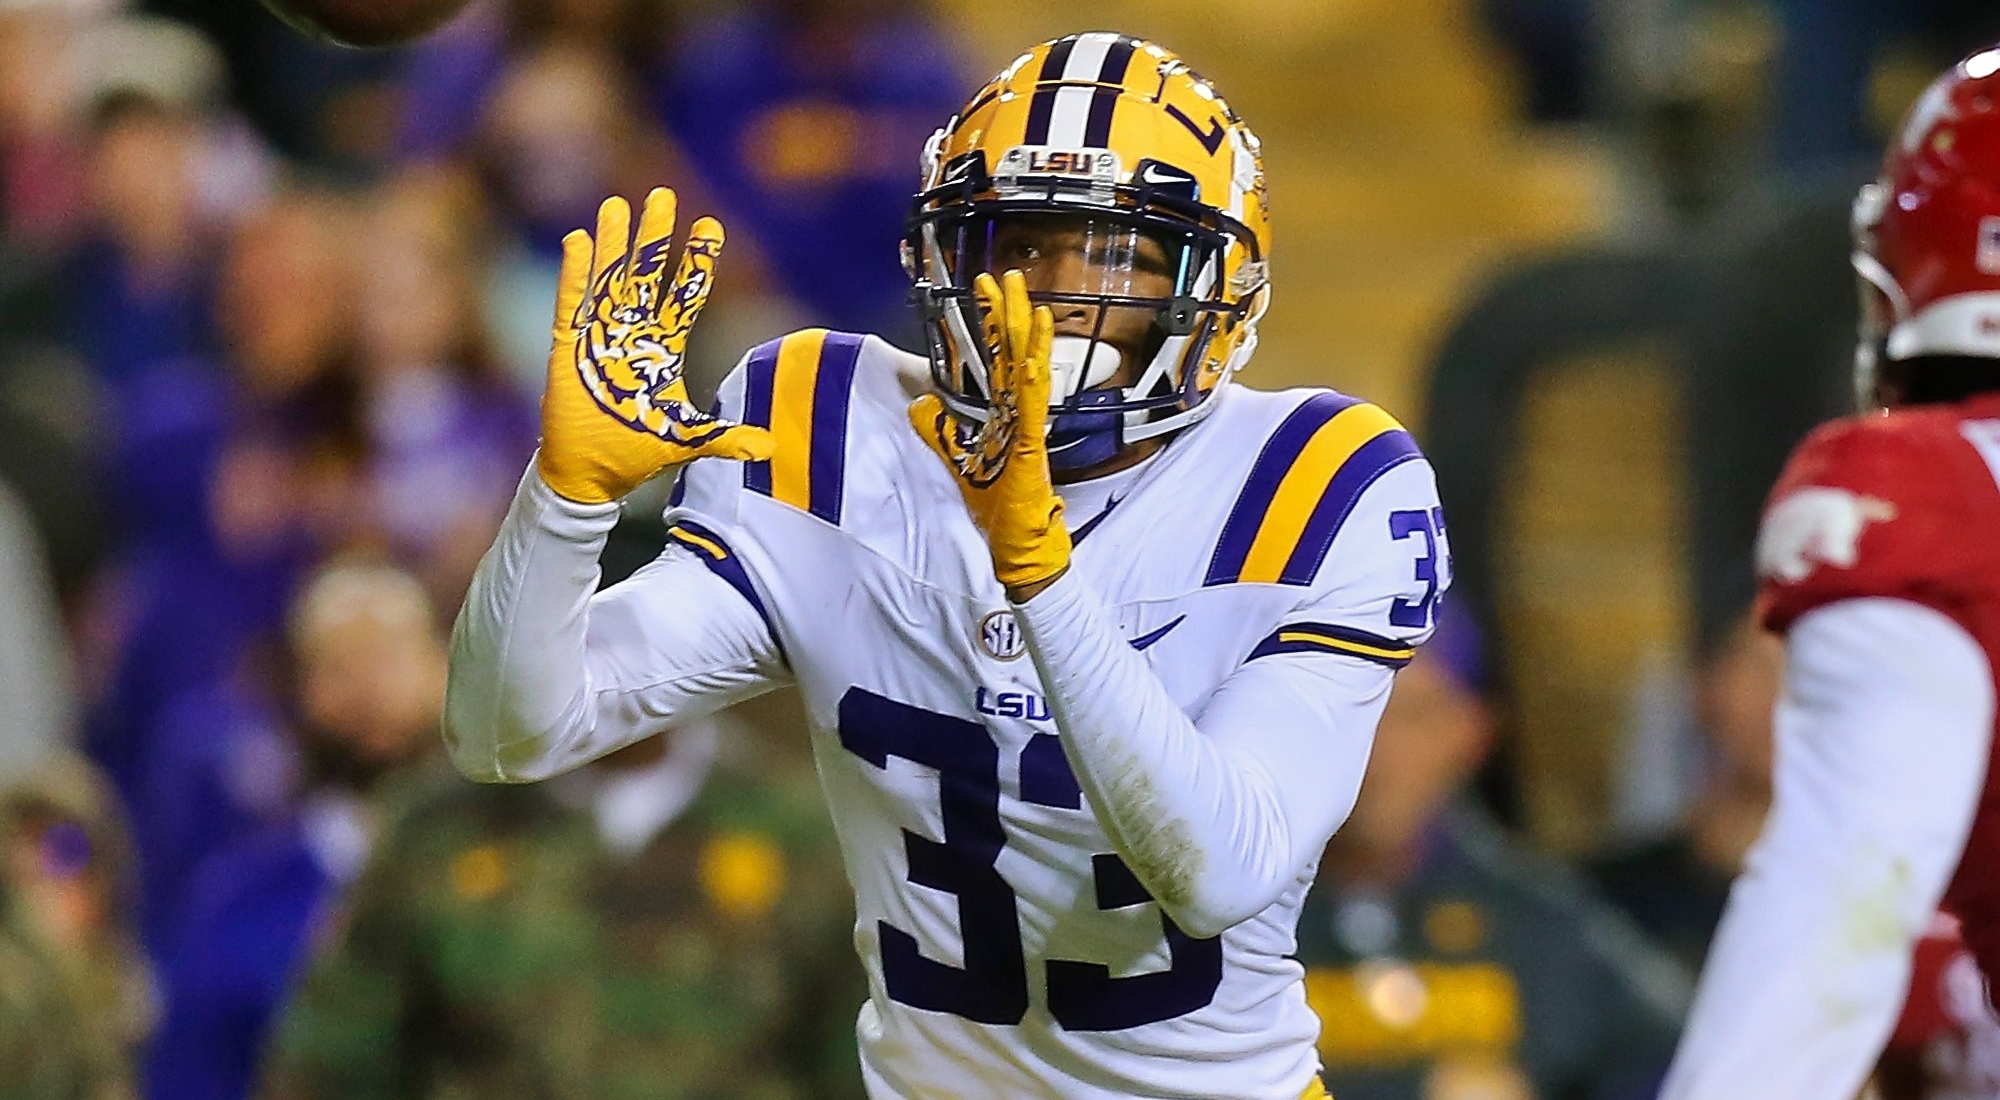 LSU football player Greg Brooks diagnosed with rare brain cancer